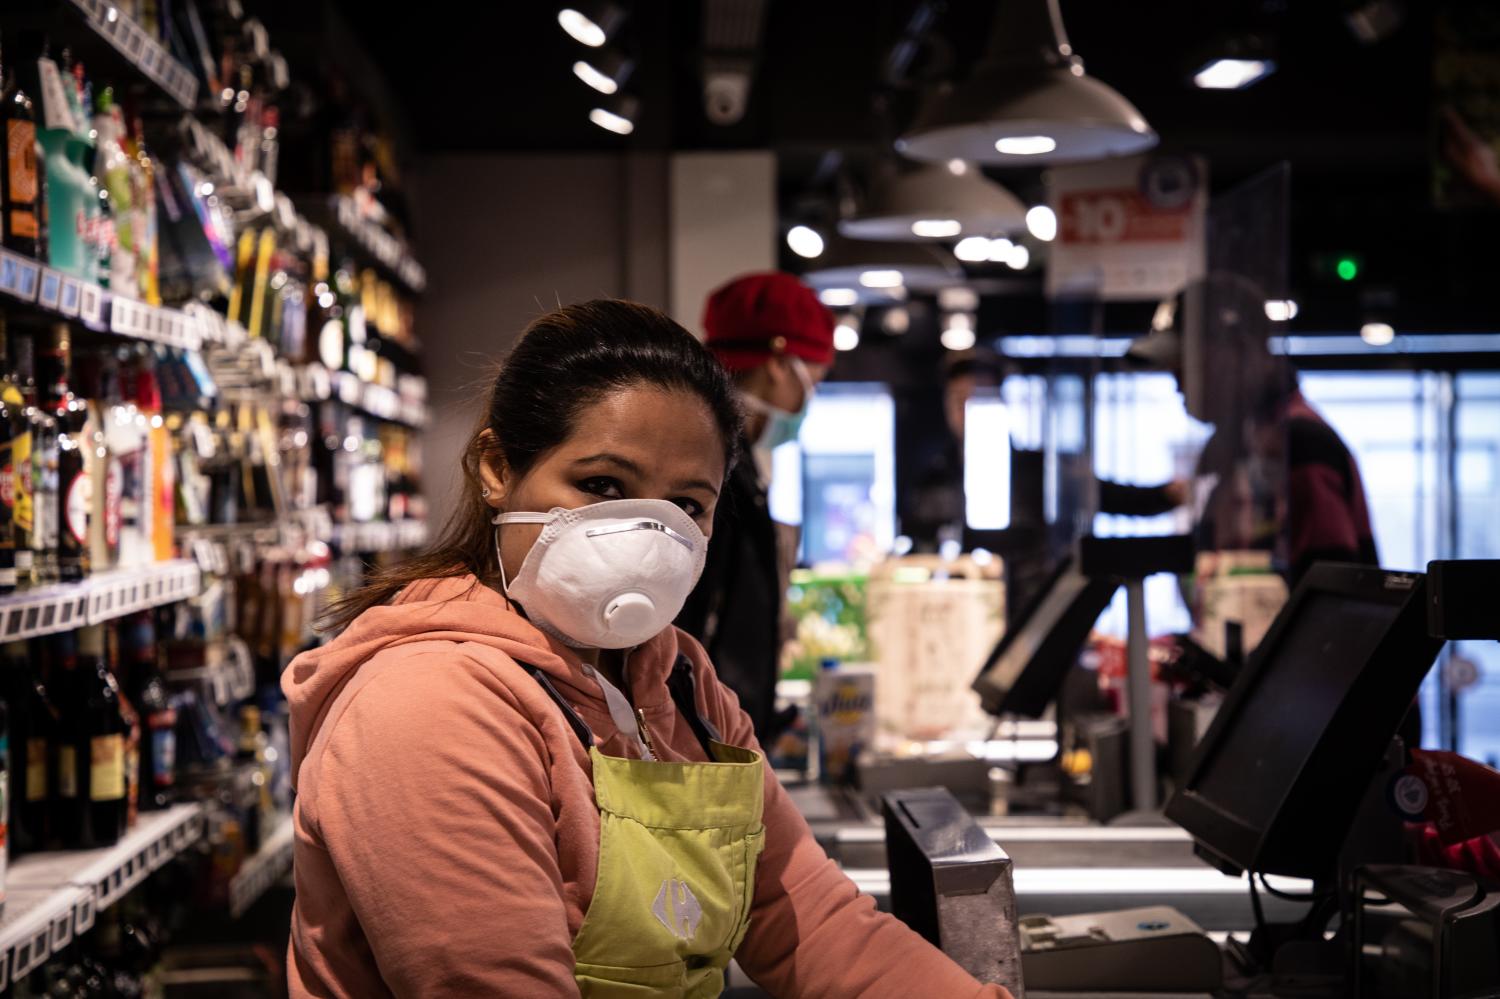 Fahmids keeps on doing her job as a cashier in Paris, wearing a face mask and gloves. A crystal panel has been installed to separate her from costumers.